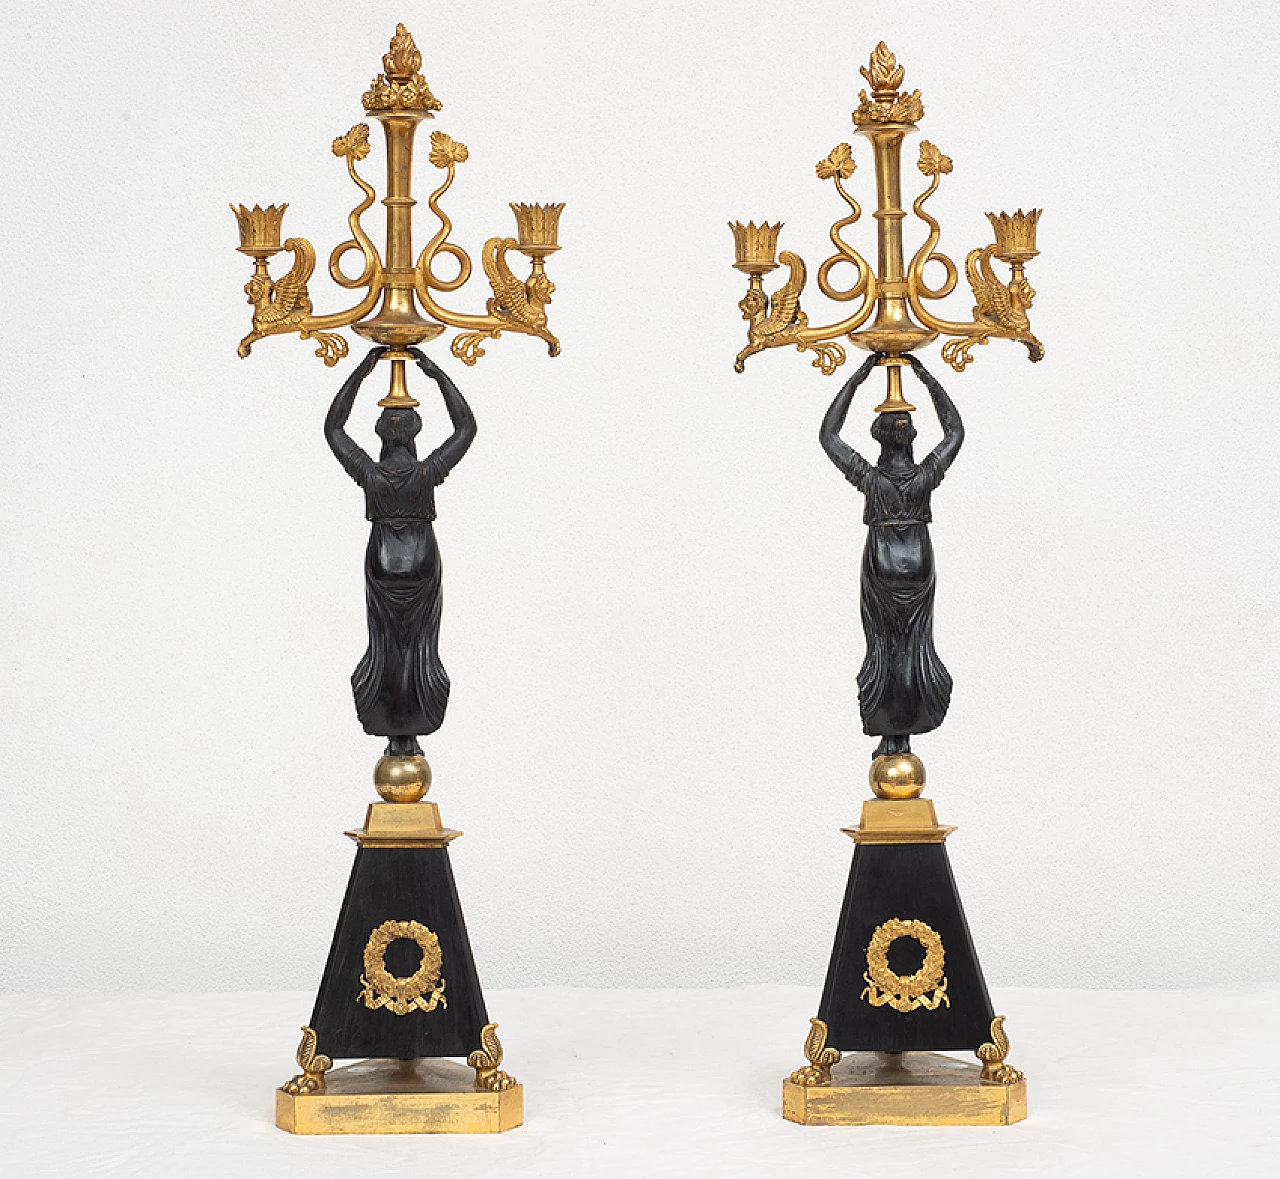 Pair of burnished bronze Direttorio candelabra with figure of a woman, early 19th century 6